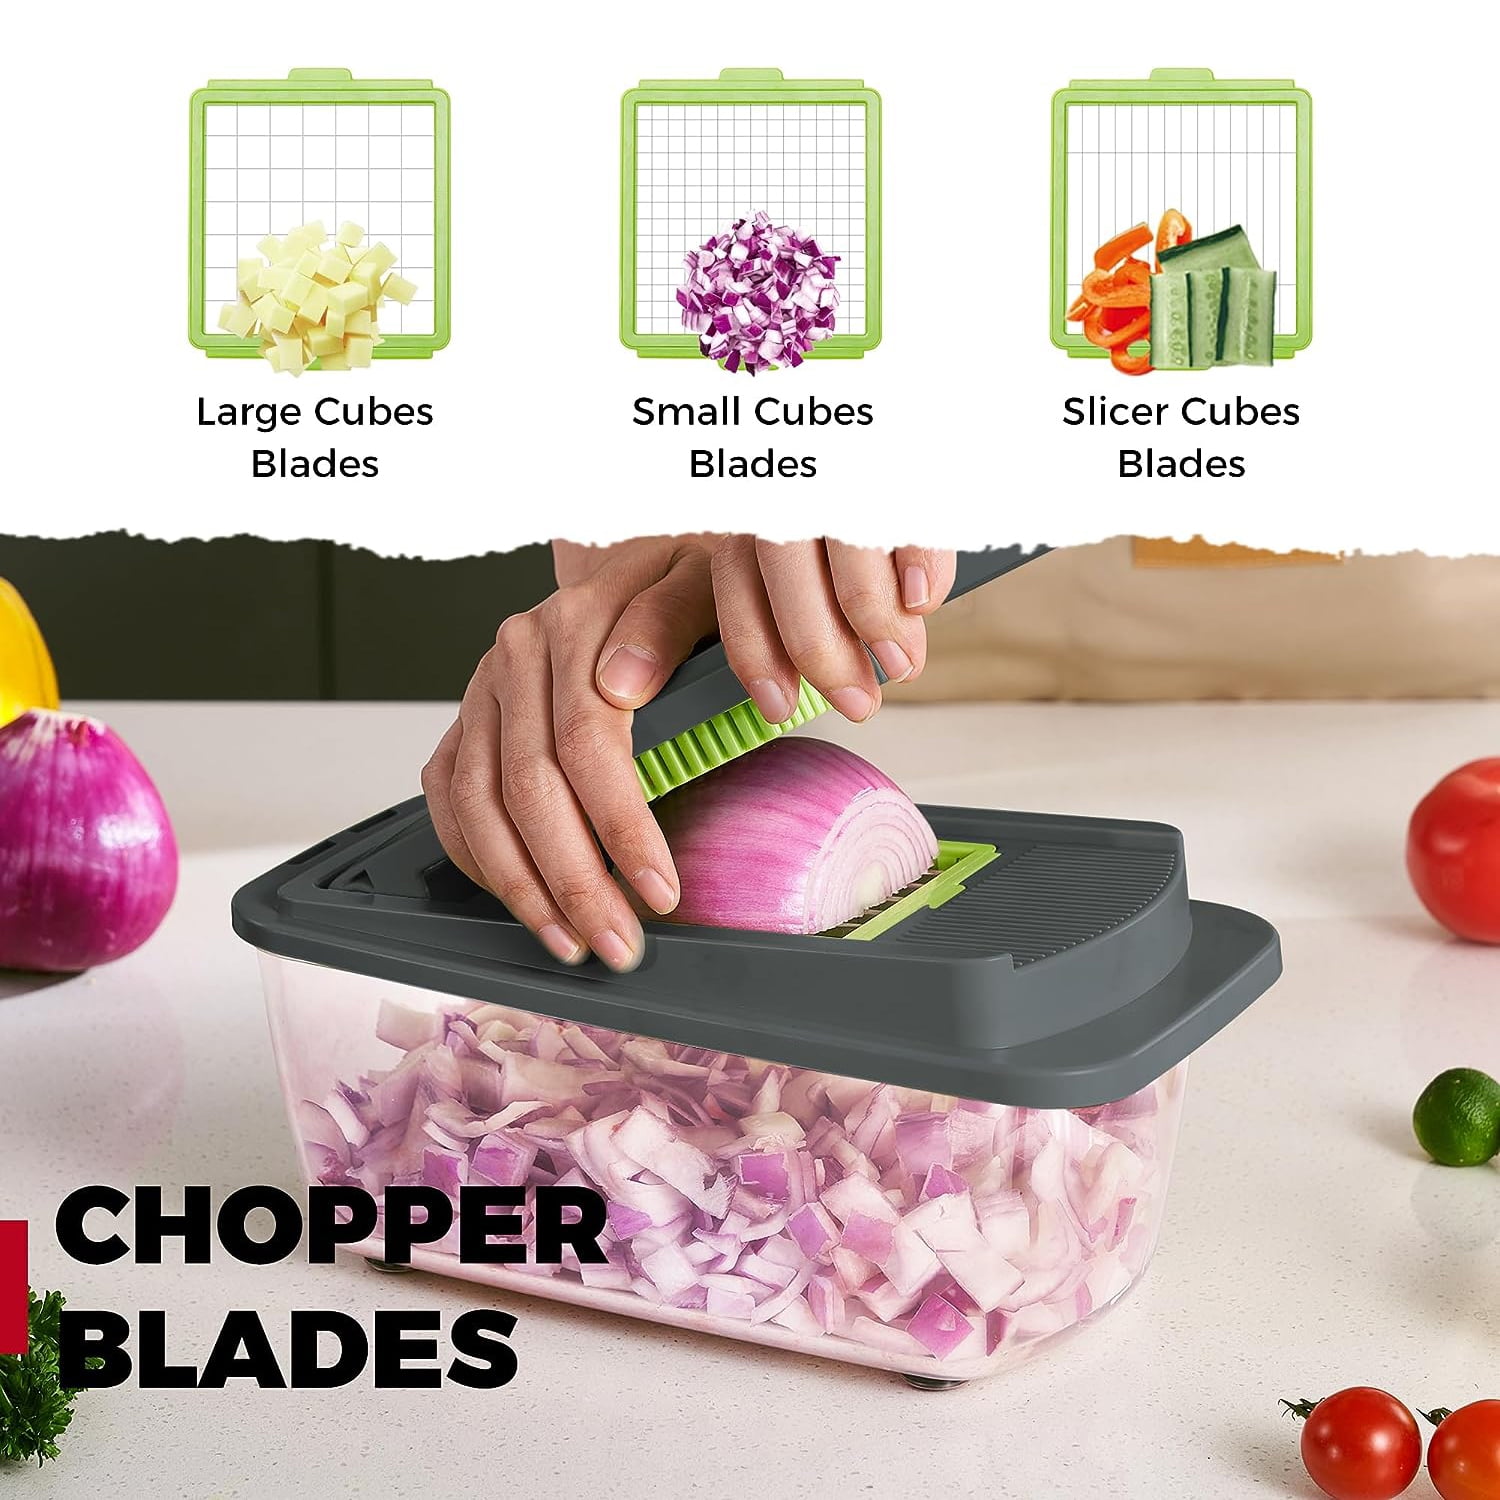  KucheCraft Vegetable Chopper, 13 in 1 Onion Chopper Dicer,  Manual Vegetable Cutter with Container and Lid, Pro Food Chopper for Potato  Tomato, Kitchen Veggie Slicer for Zucchini-(8 Blades, Green): Home 